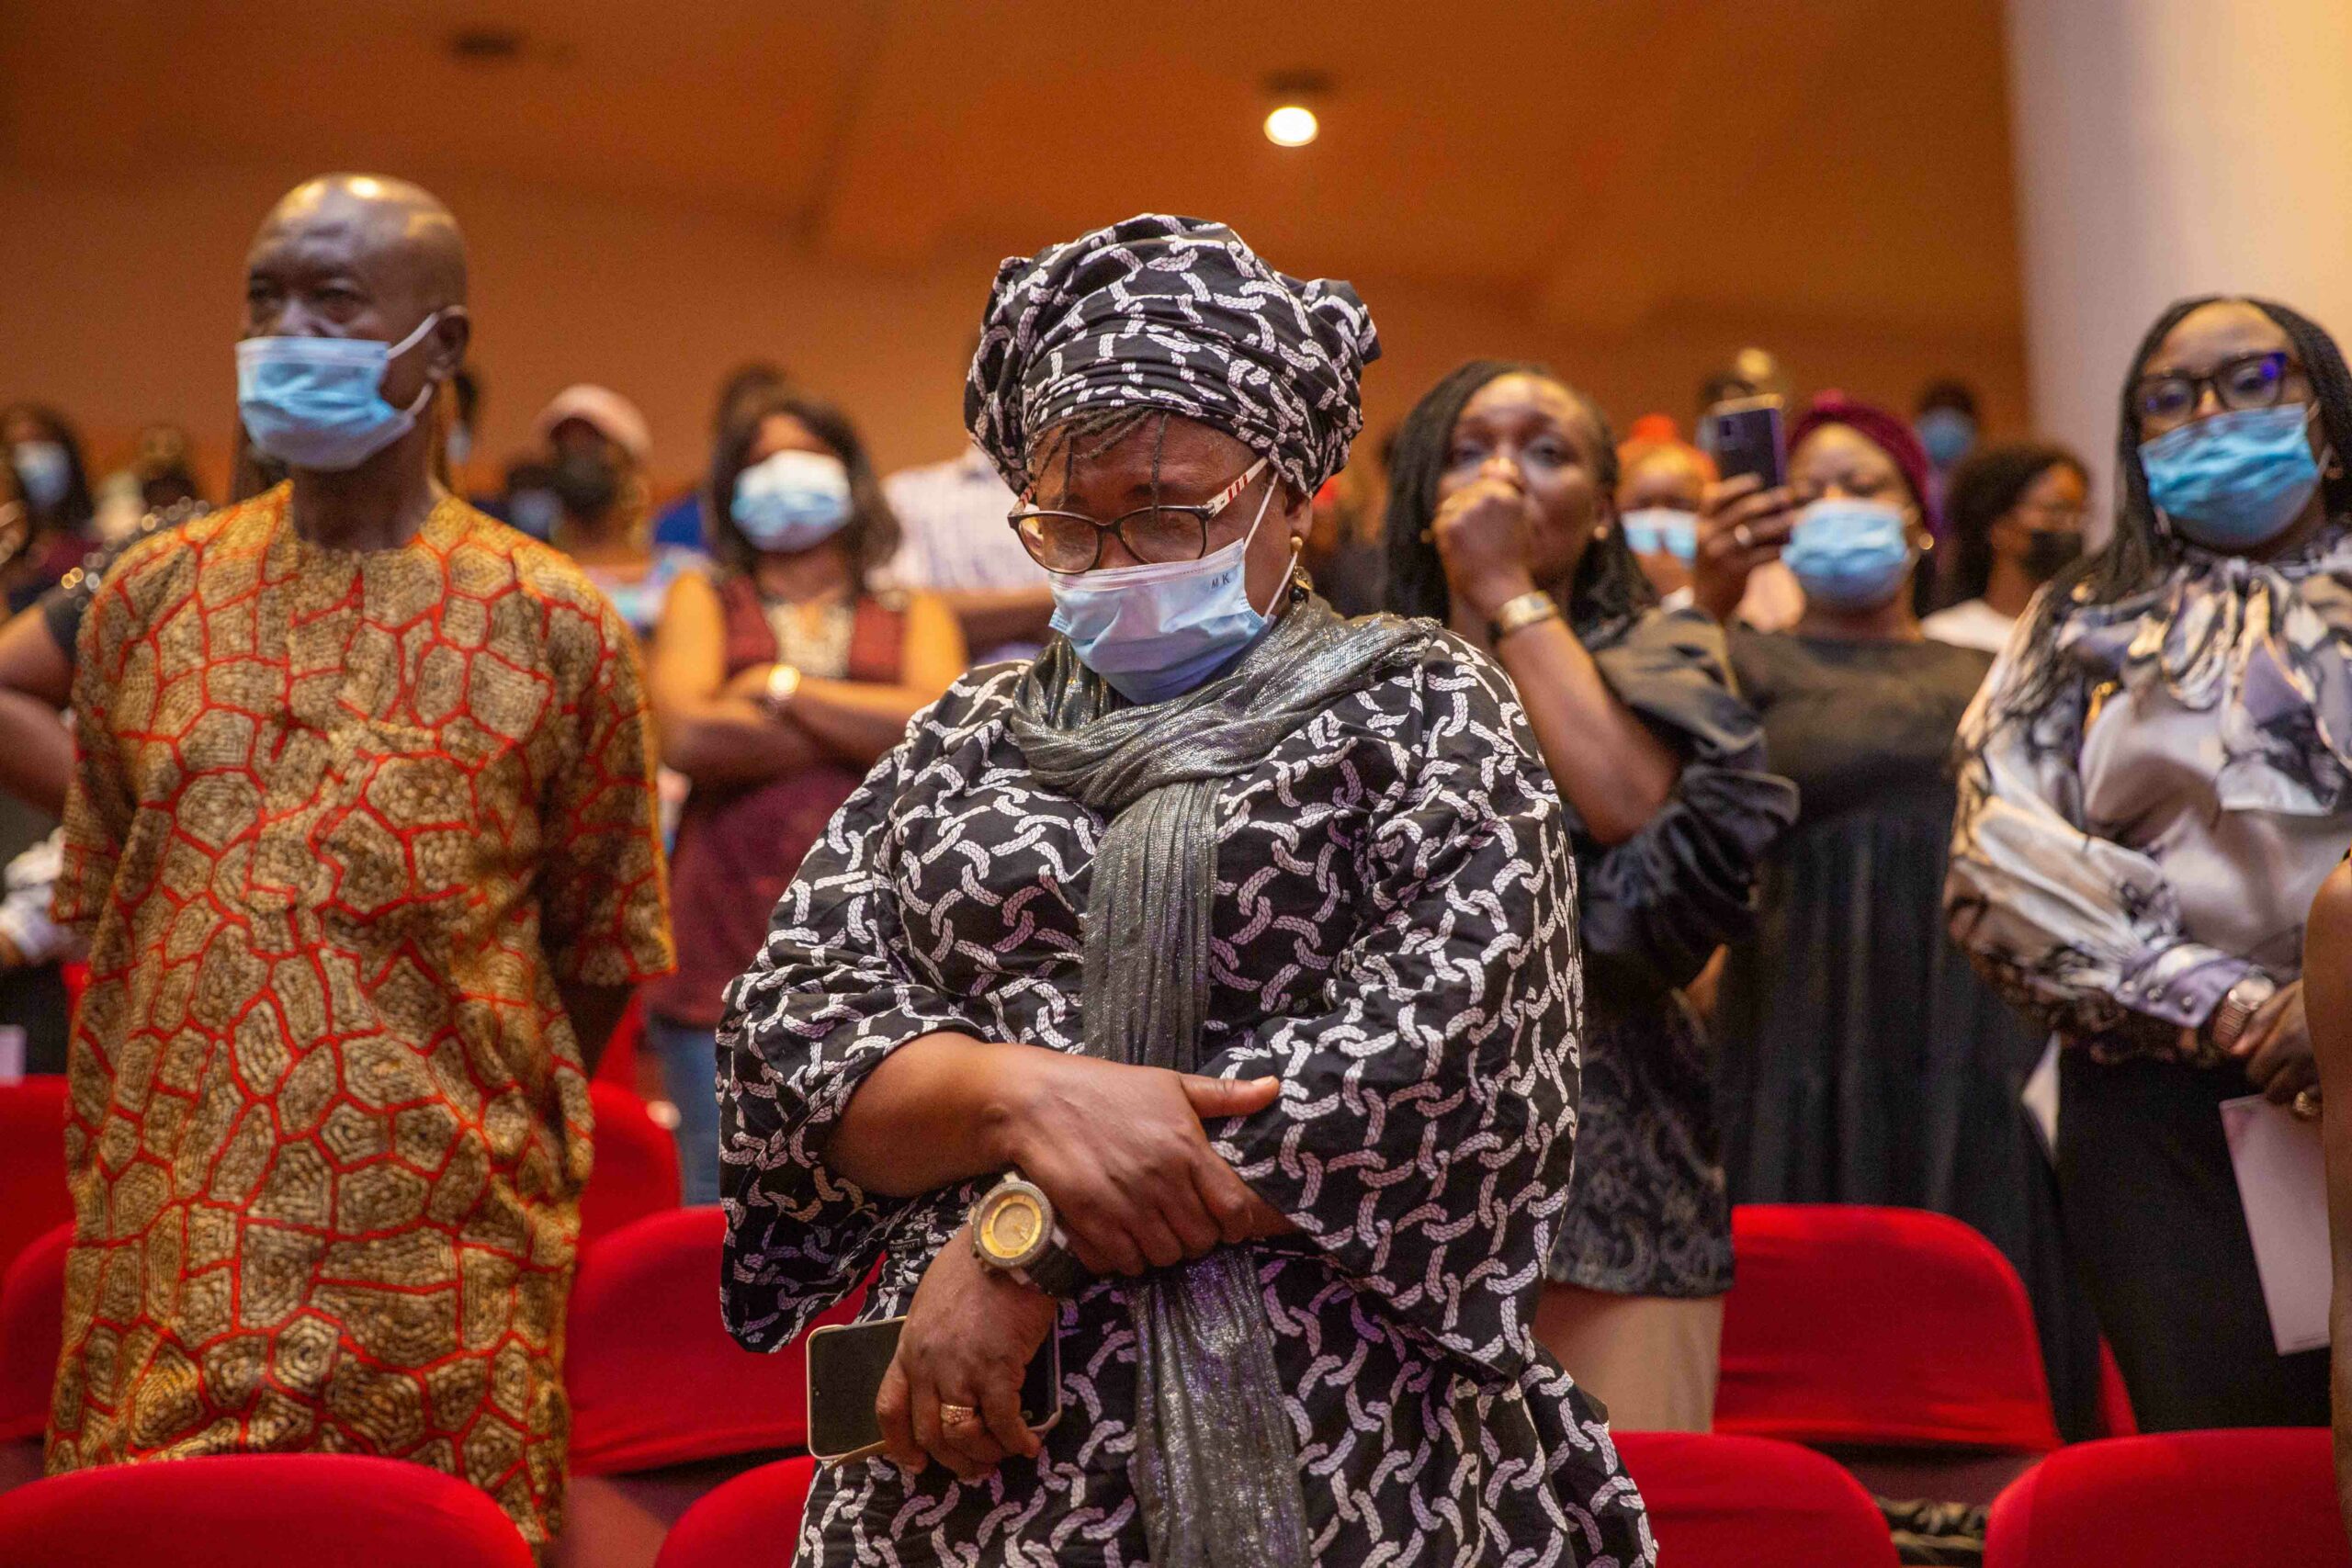 Deep sorrow expressed by a member of the Fountain of Life Church as the remains of the late Pastor Nomthi Odukoya were transported to the church auditorium in Lagos on Tuesday